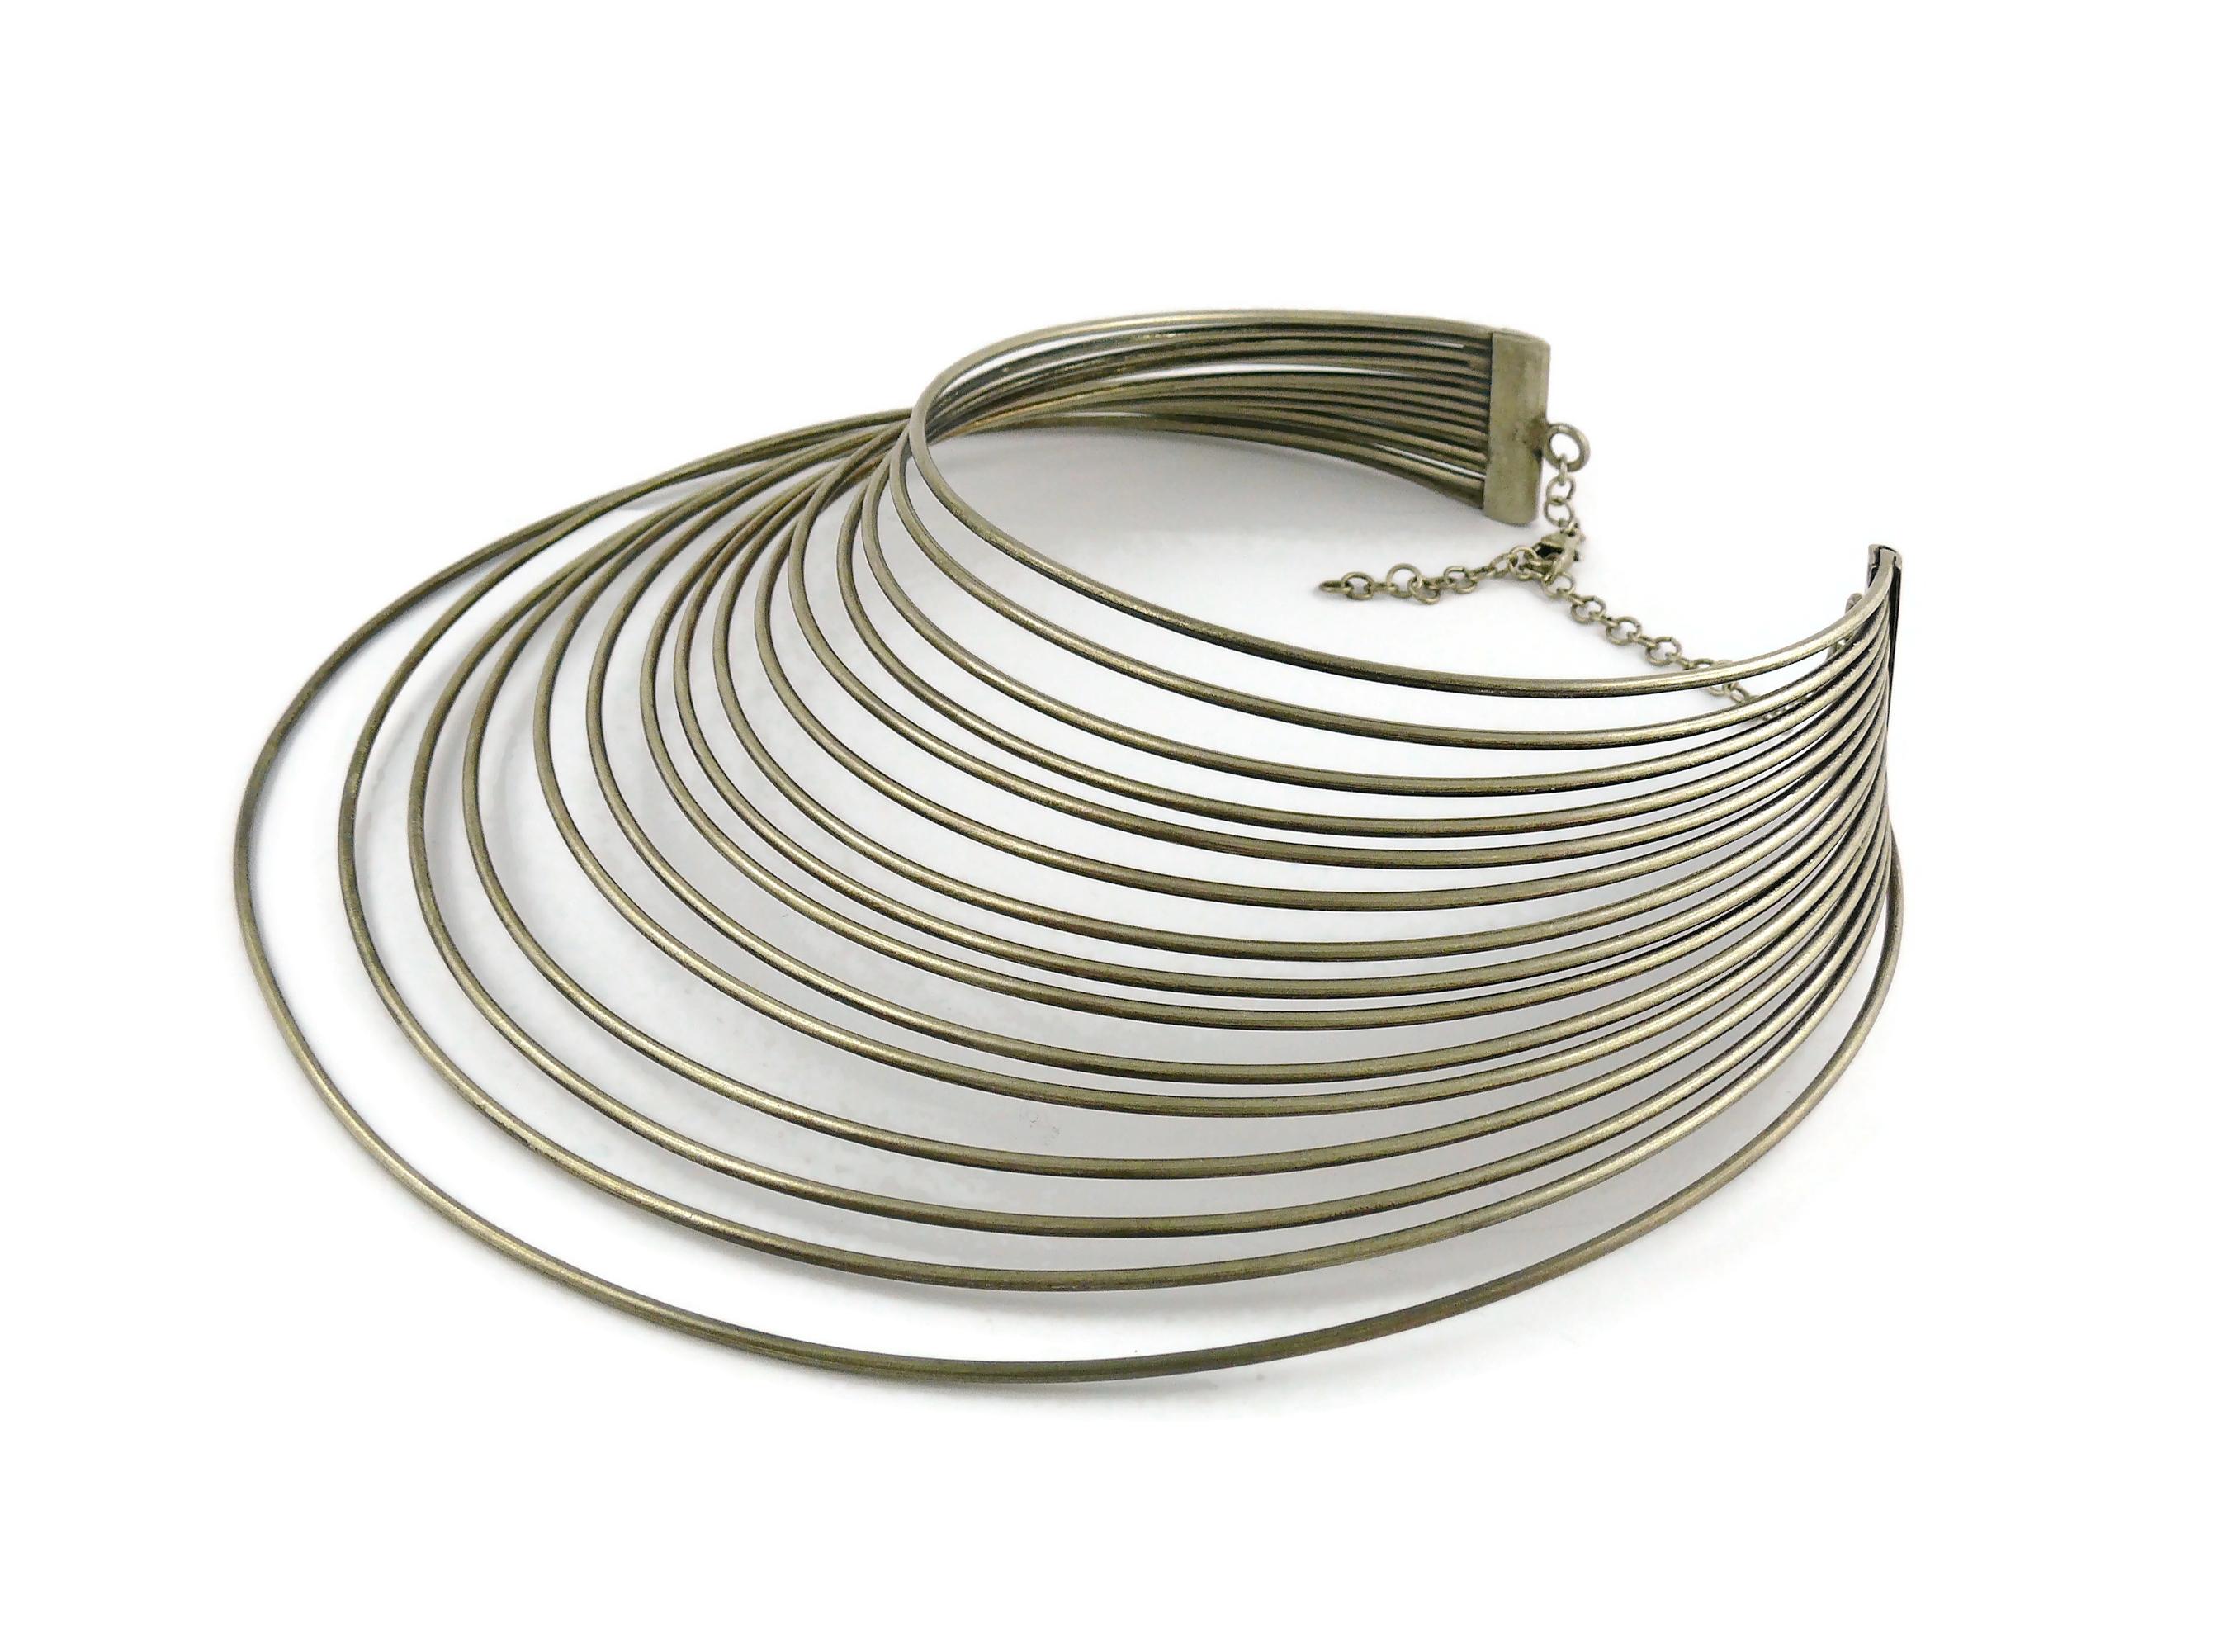 Jean Paul Gaultier Vintage Masai Multi Wire Silver Toned Choker Necklace In Good Condition For Sale In Nice, FR